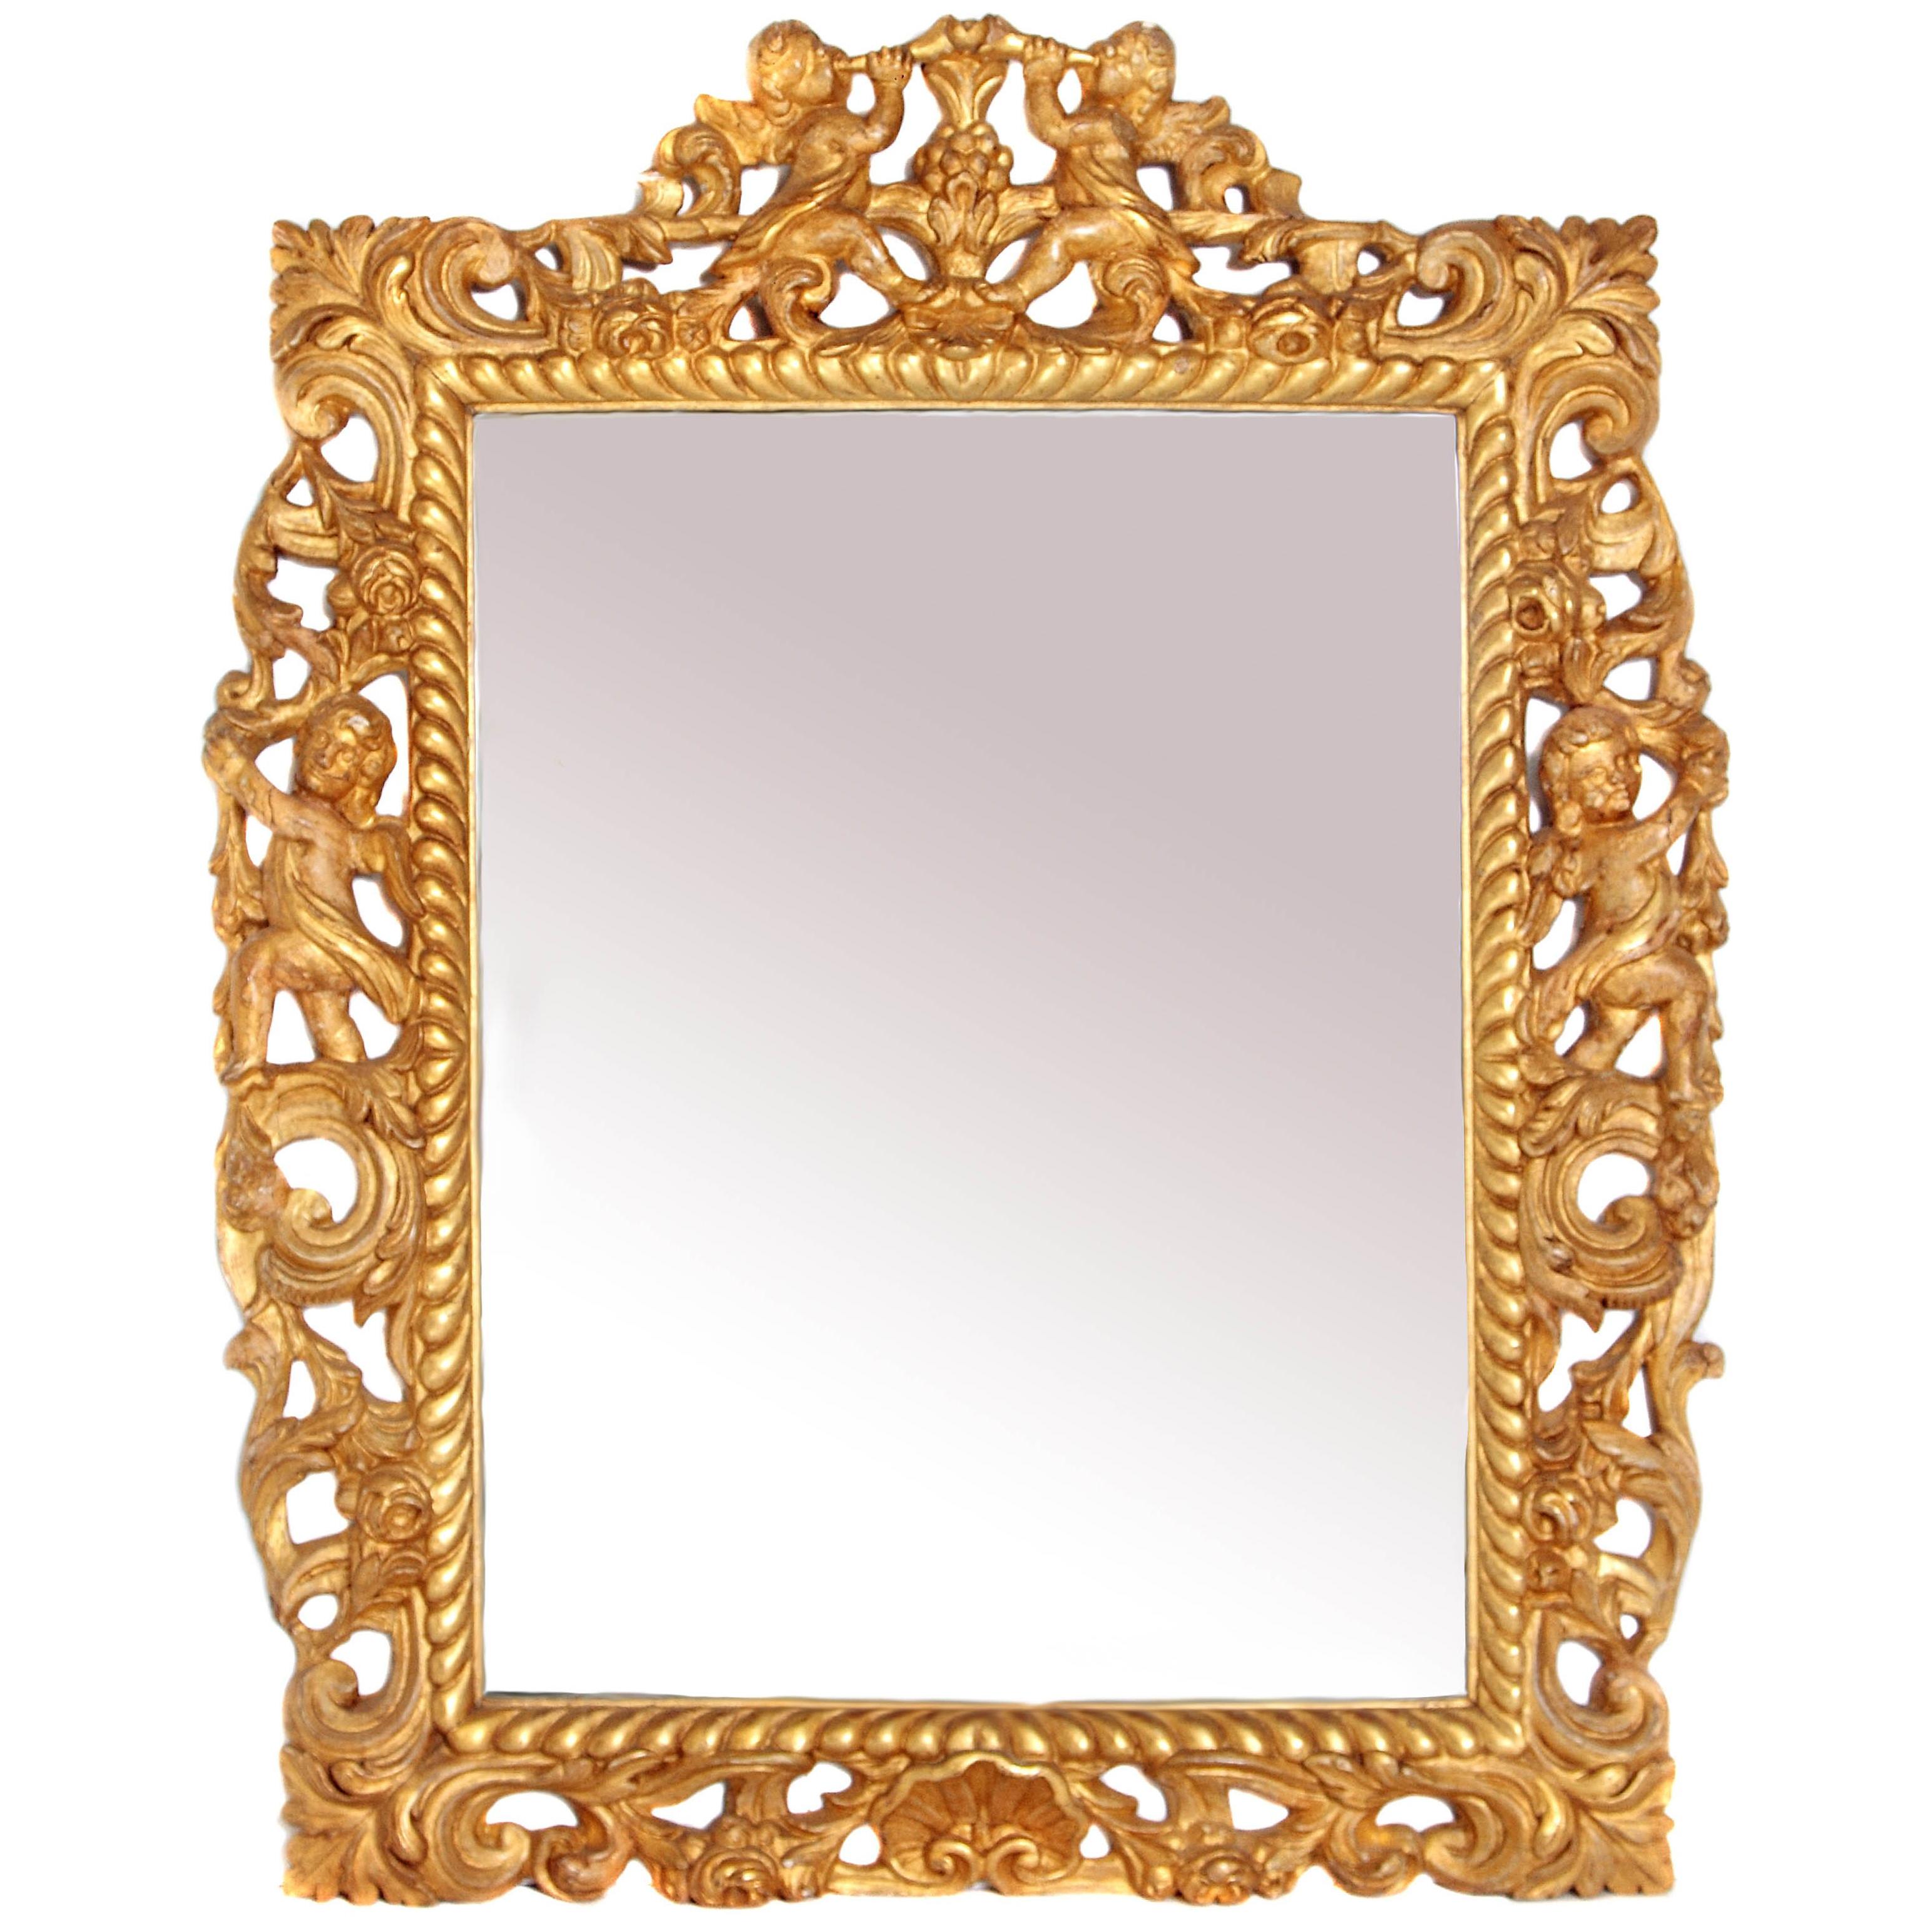 Late 17th Century English Charles II Giltwood Frame with Mirror